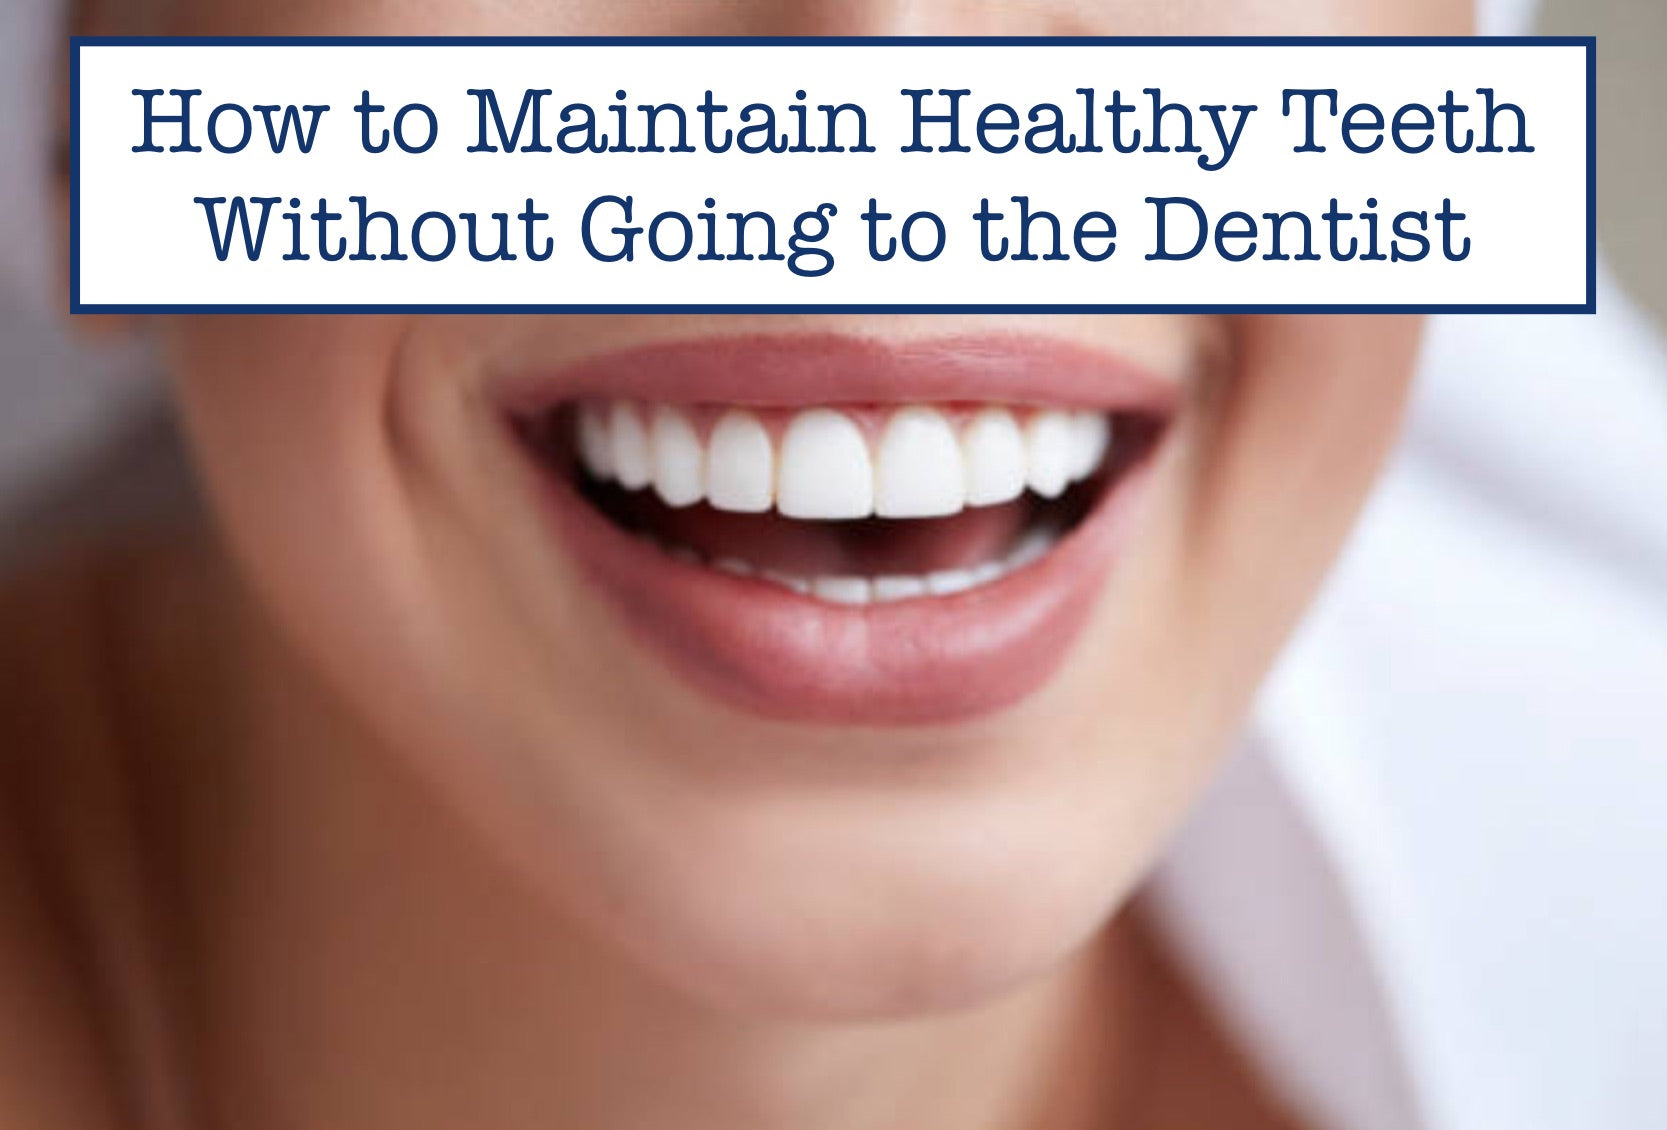 How to Maintain Healthy Teeth Without Going to the Dentist